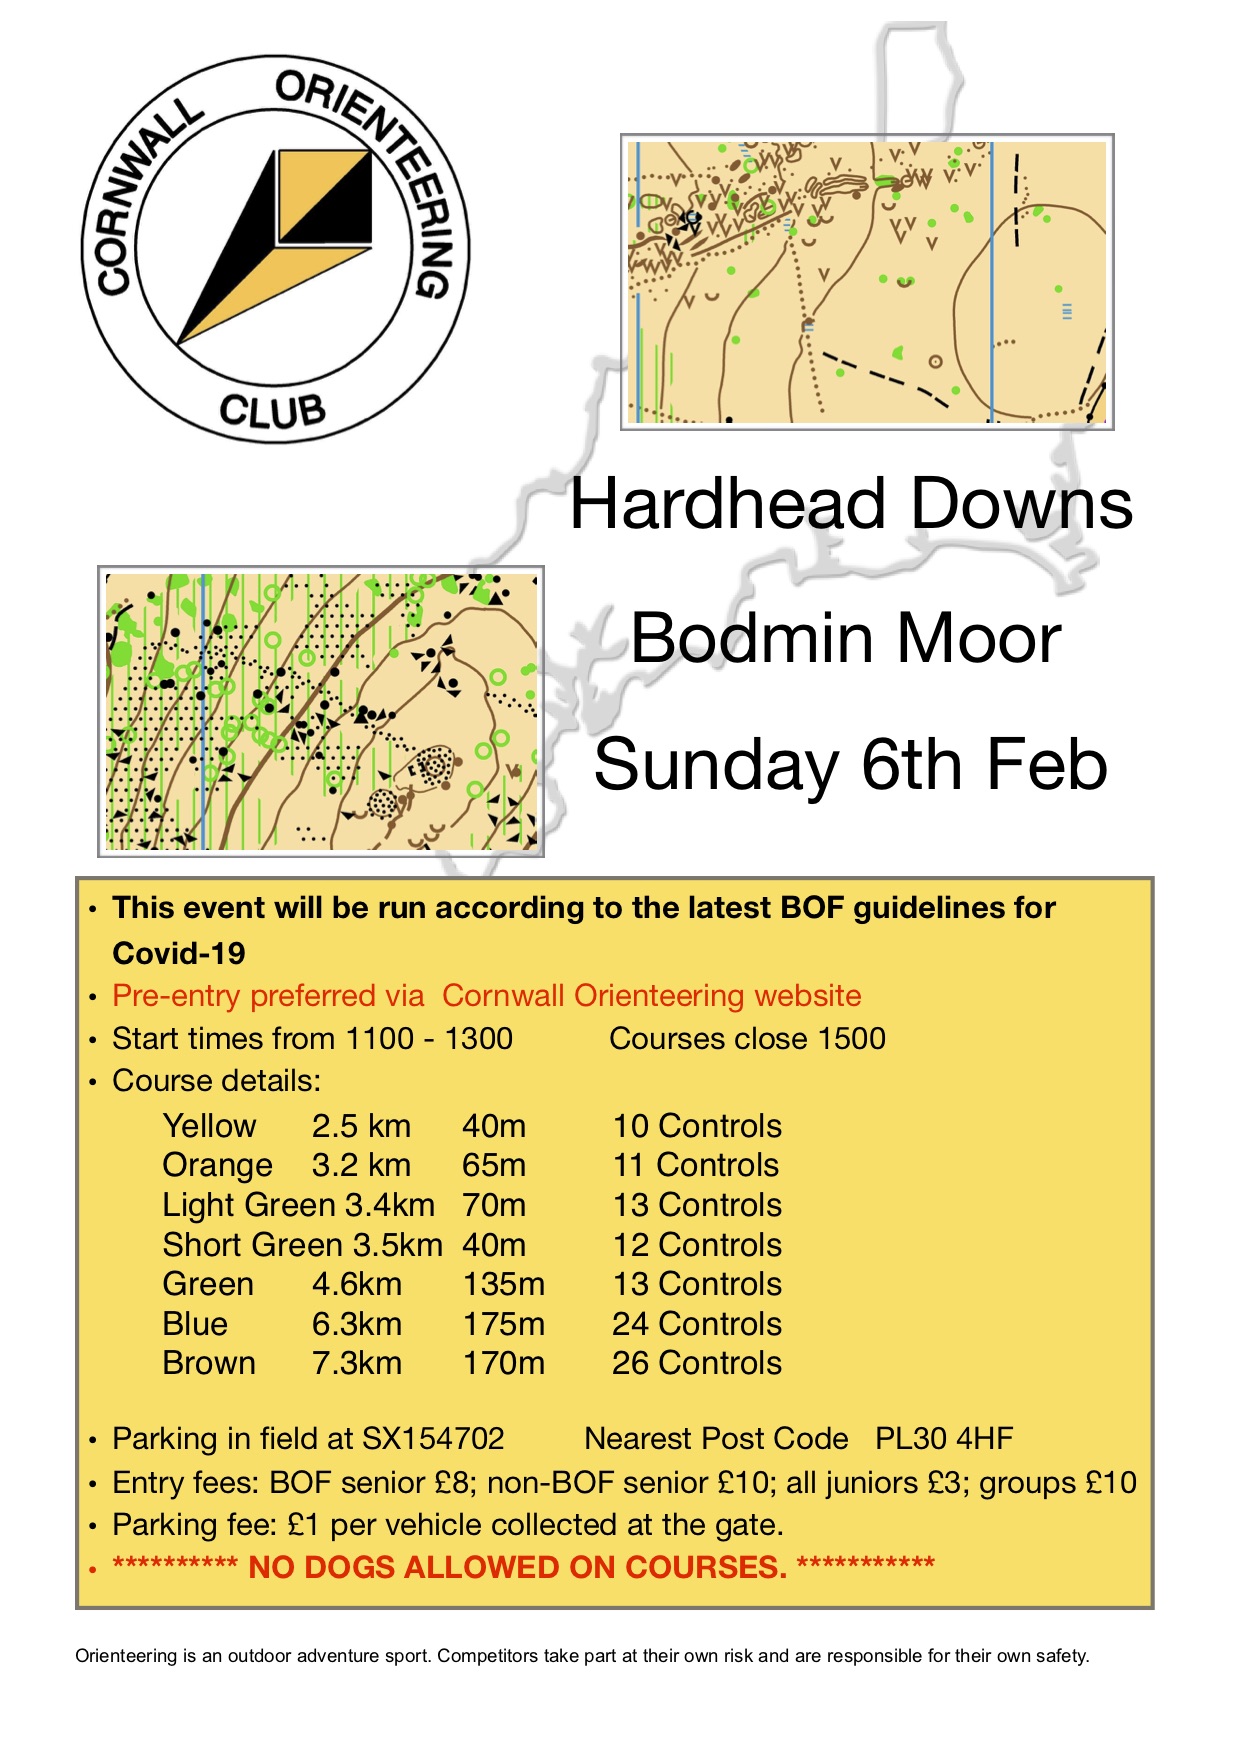 course details for Hardhead22 event